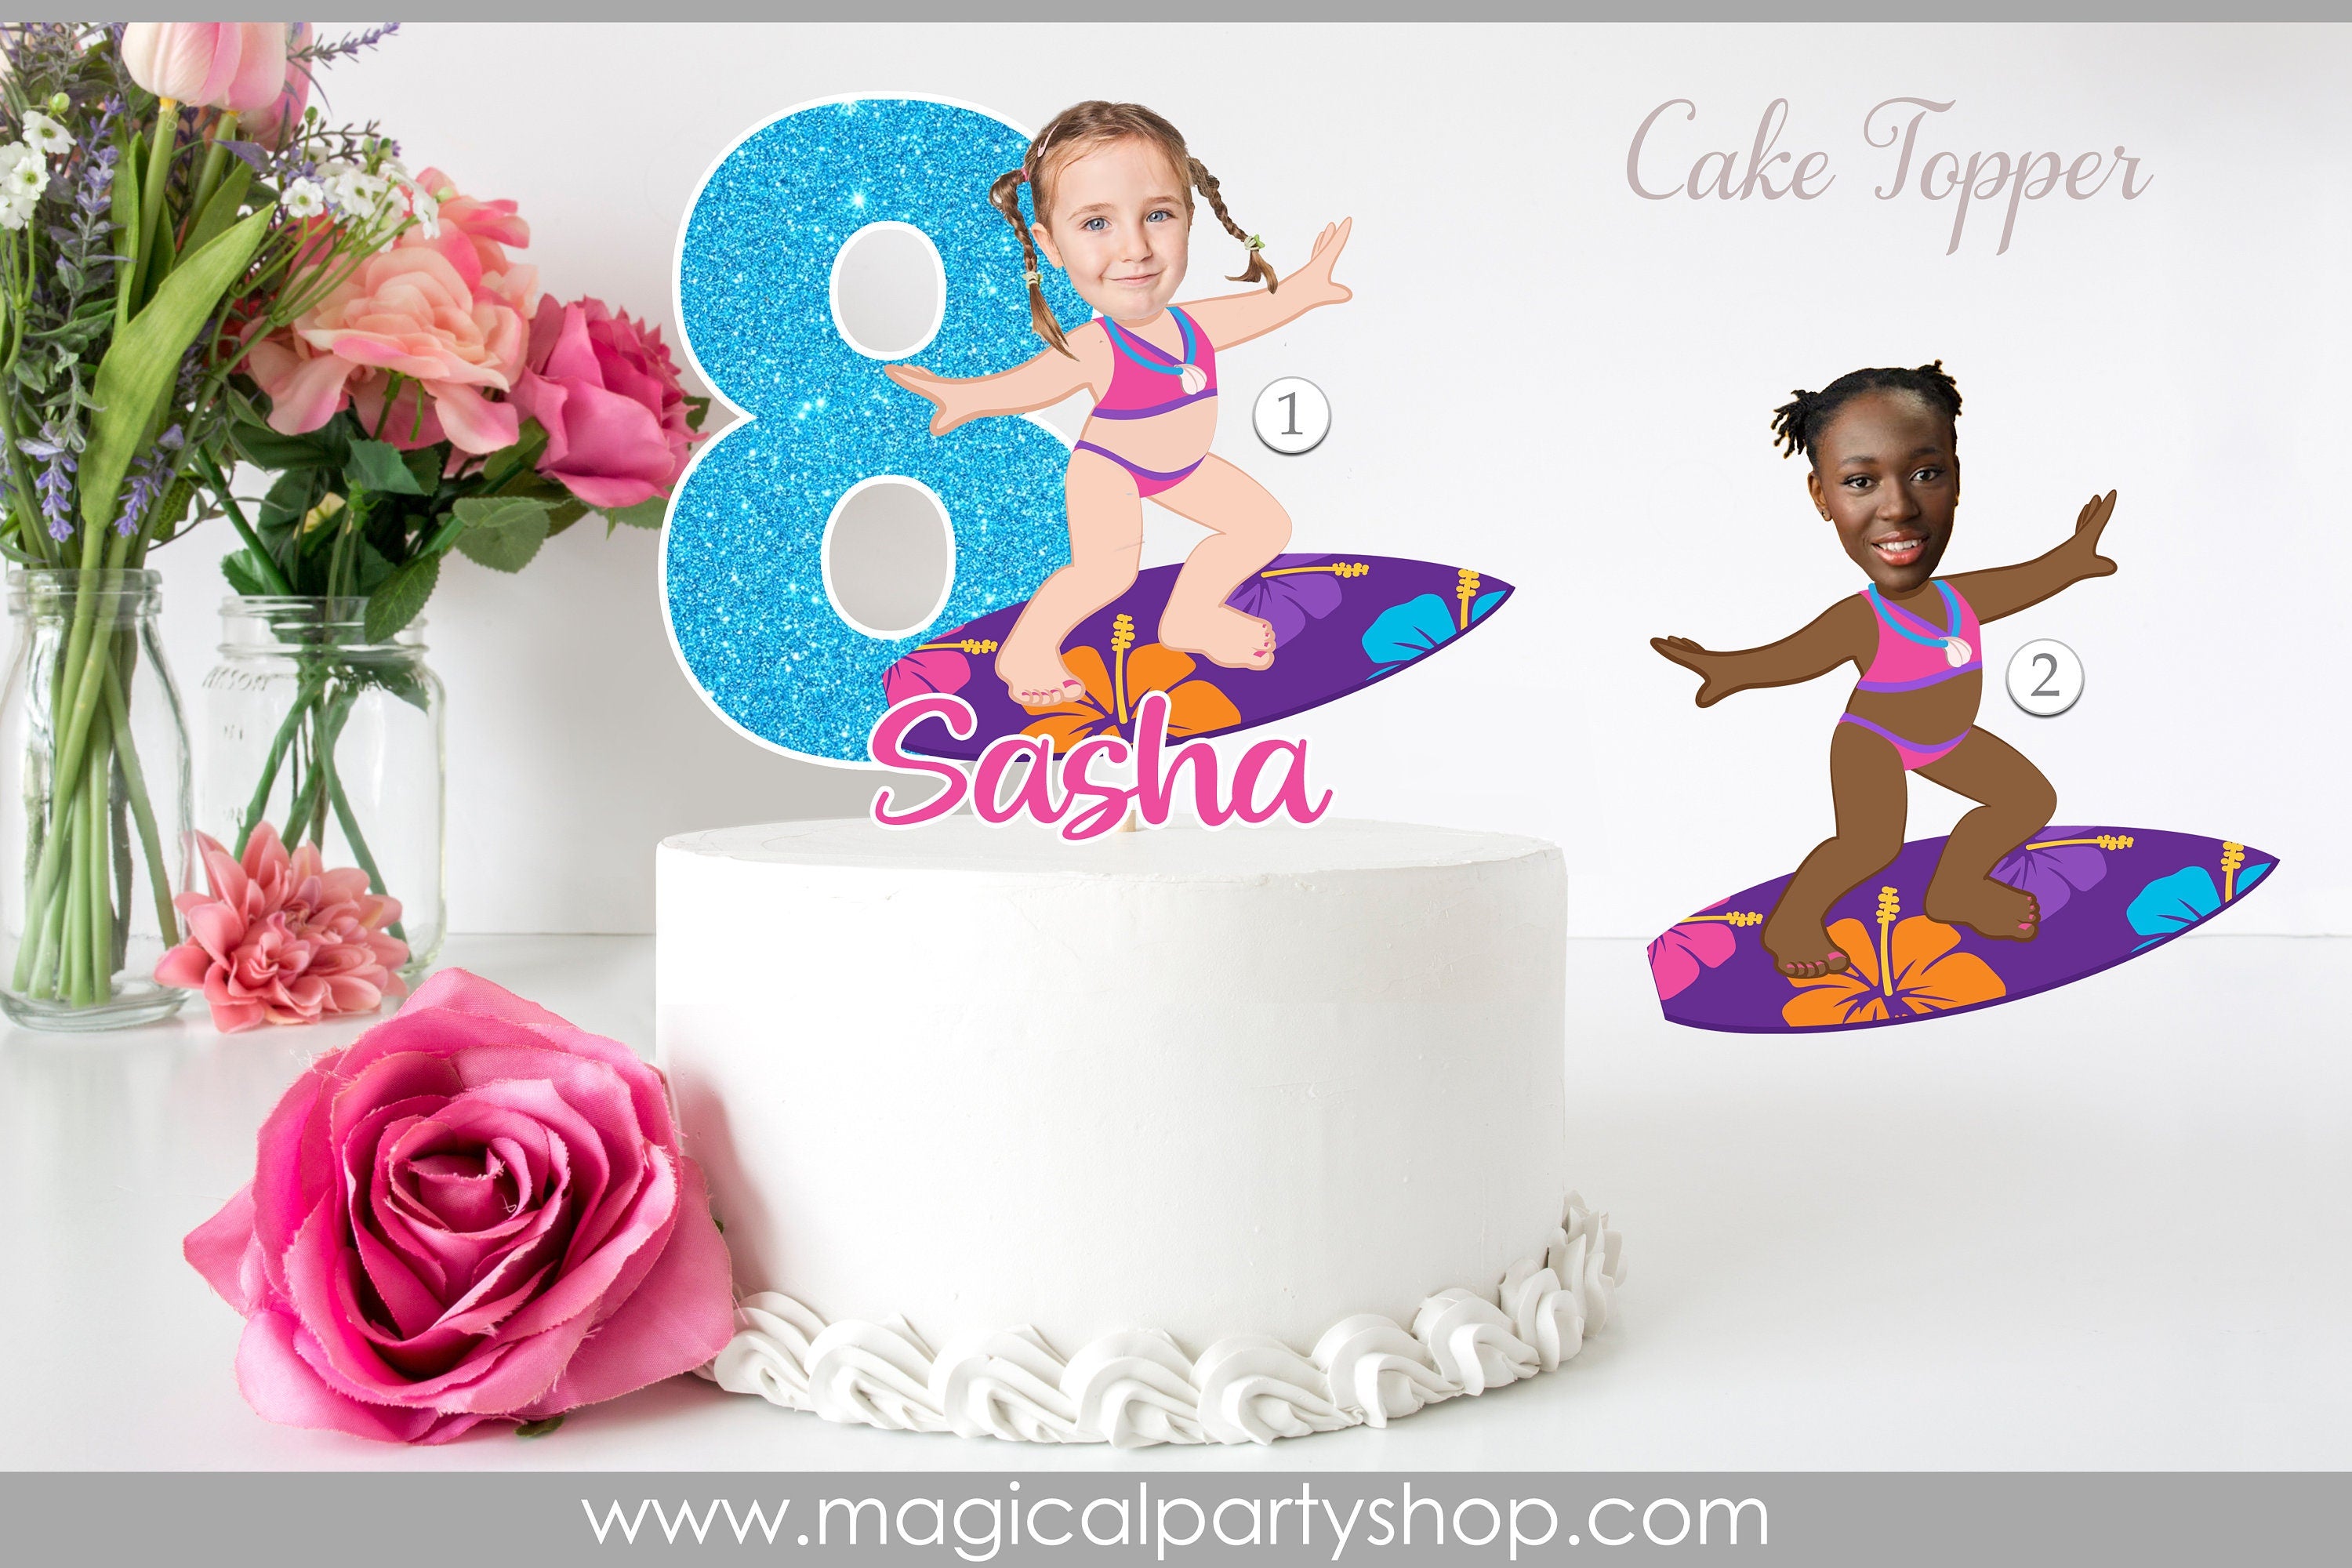 Surfer Girl Cake Toppers | Surfer Boy Cake Toppers | Face Photo Cake Toppers |  Cupcake Toppers | Cake Topper | Beach Party